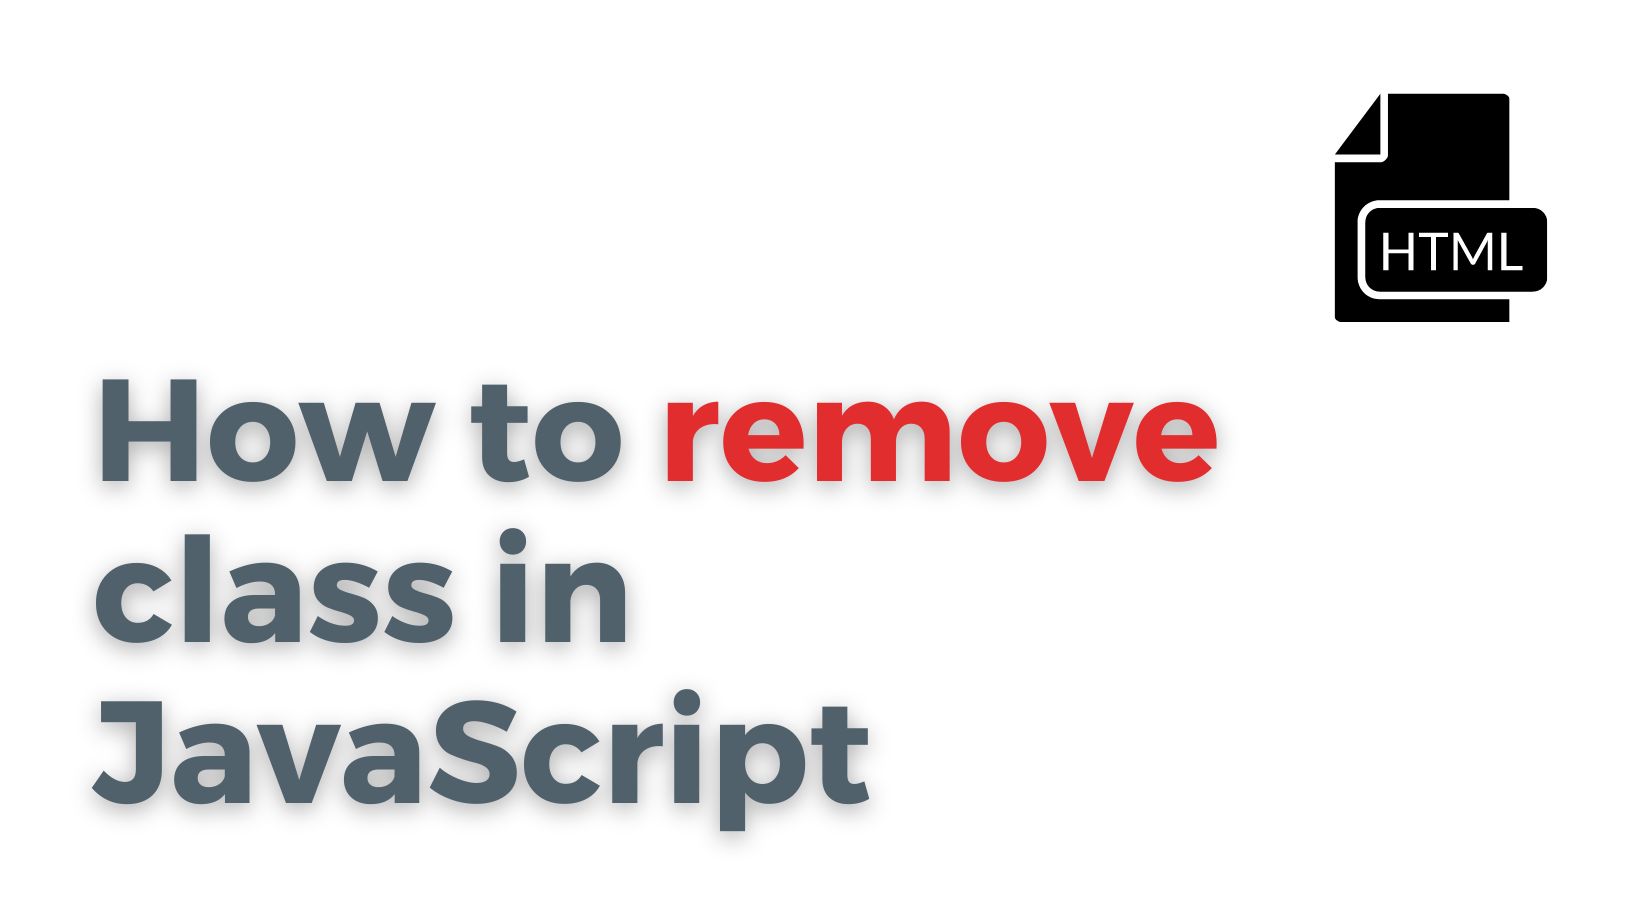 How to remove class JavaScript